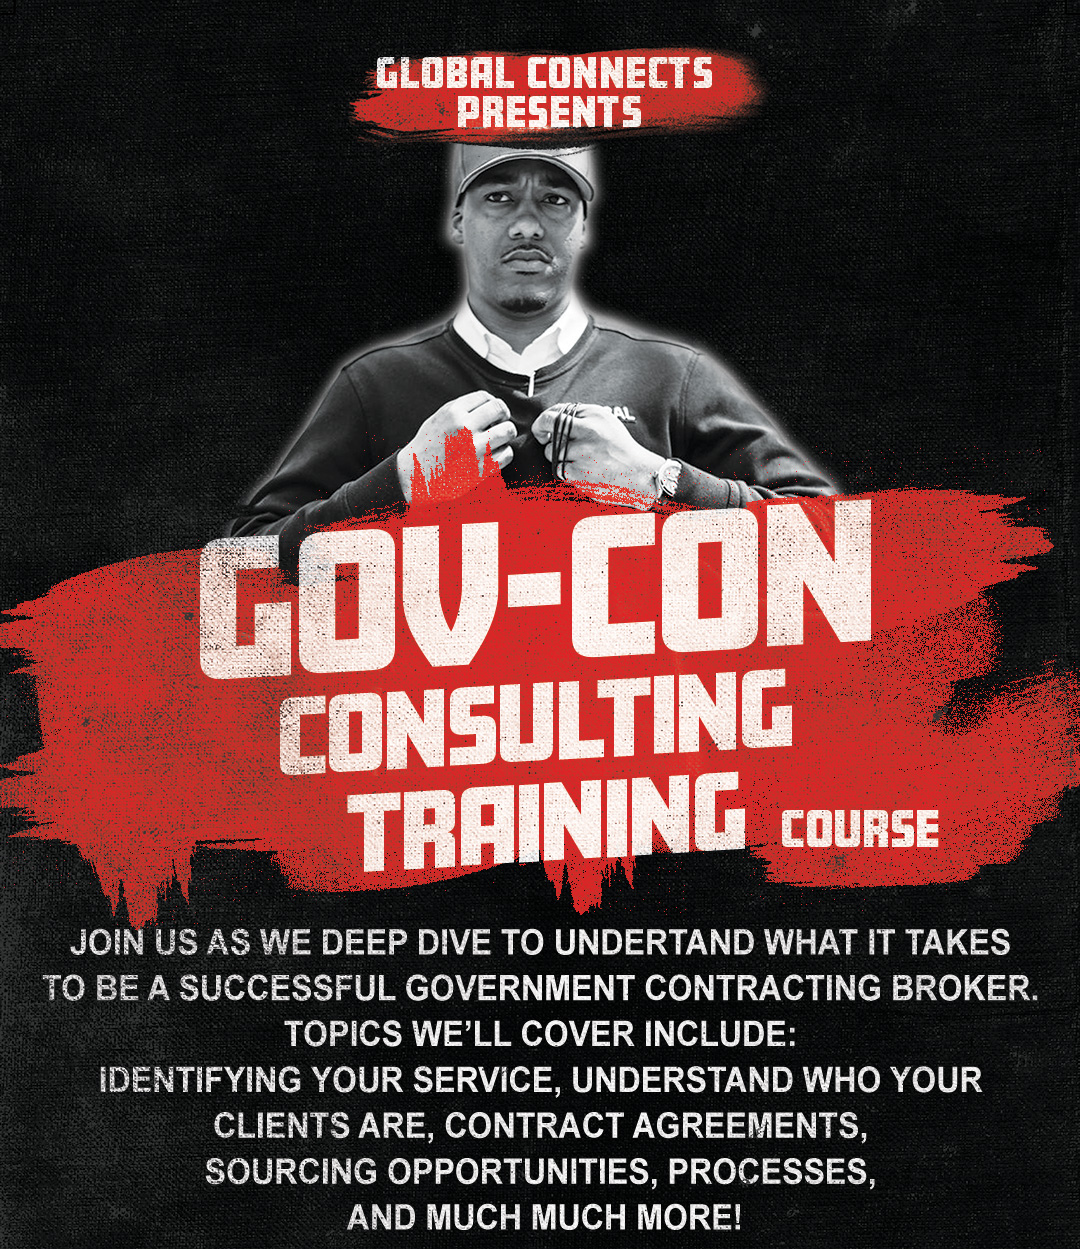 GovCon Consulting Training Course